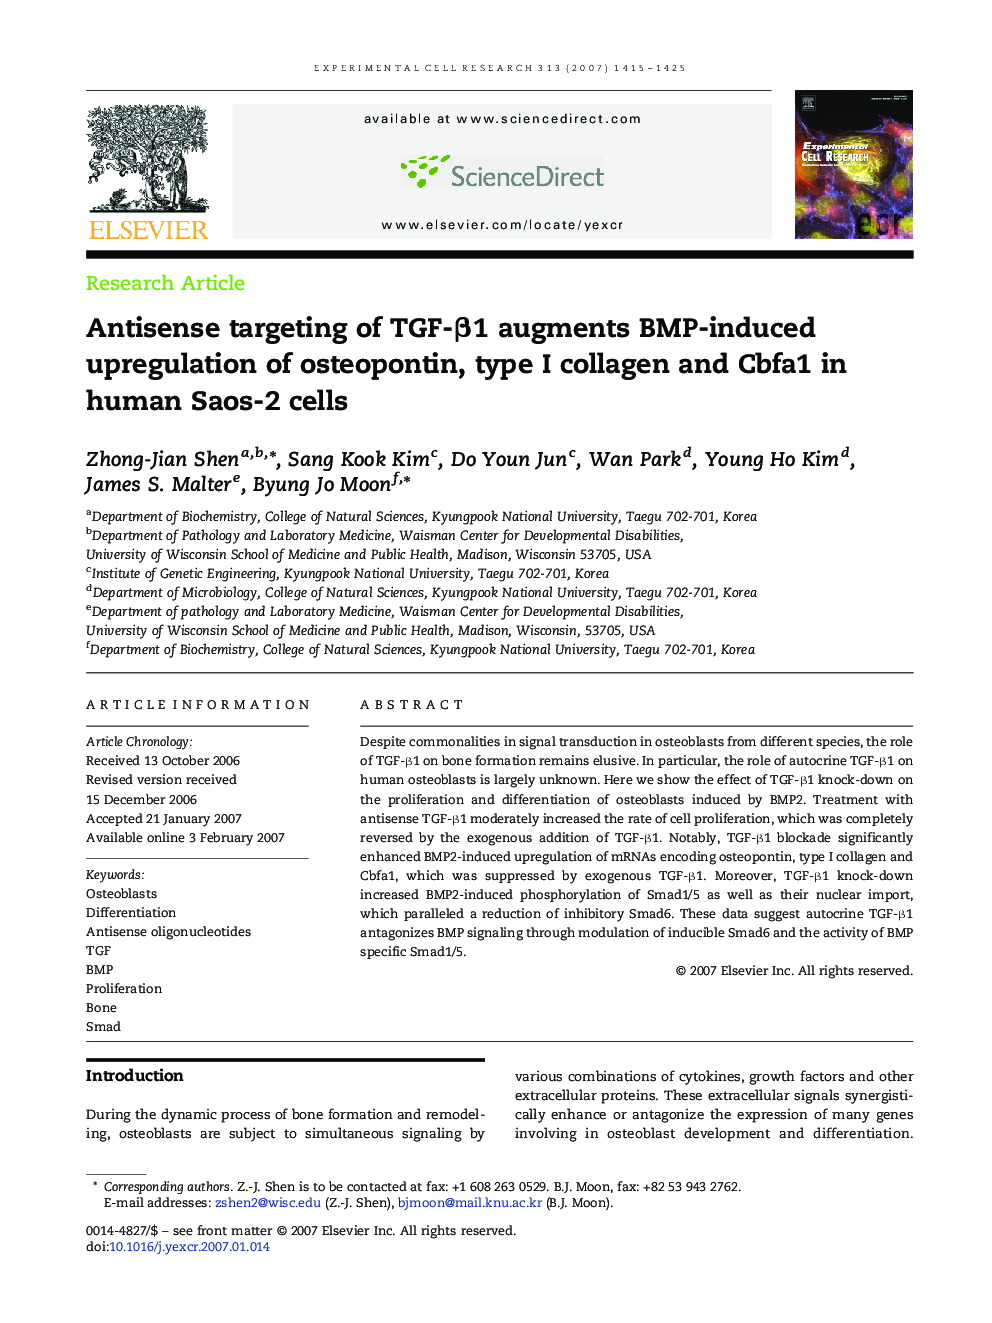 Antisense targeting of TGF-β1 augments BMP-induced upregulation of osteopontin, type I collagen and Cbfa1 in human Saos-2 cells